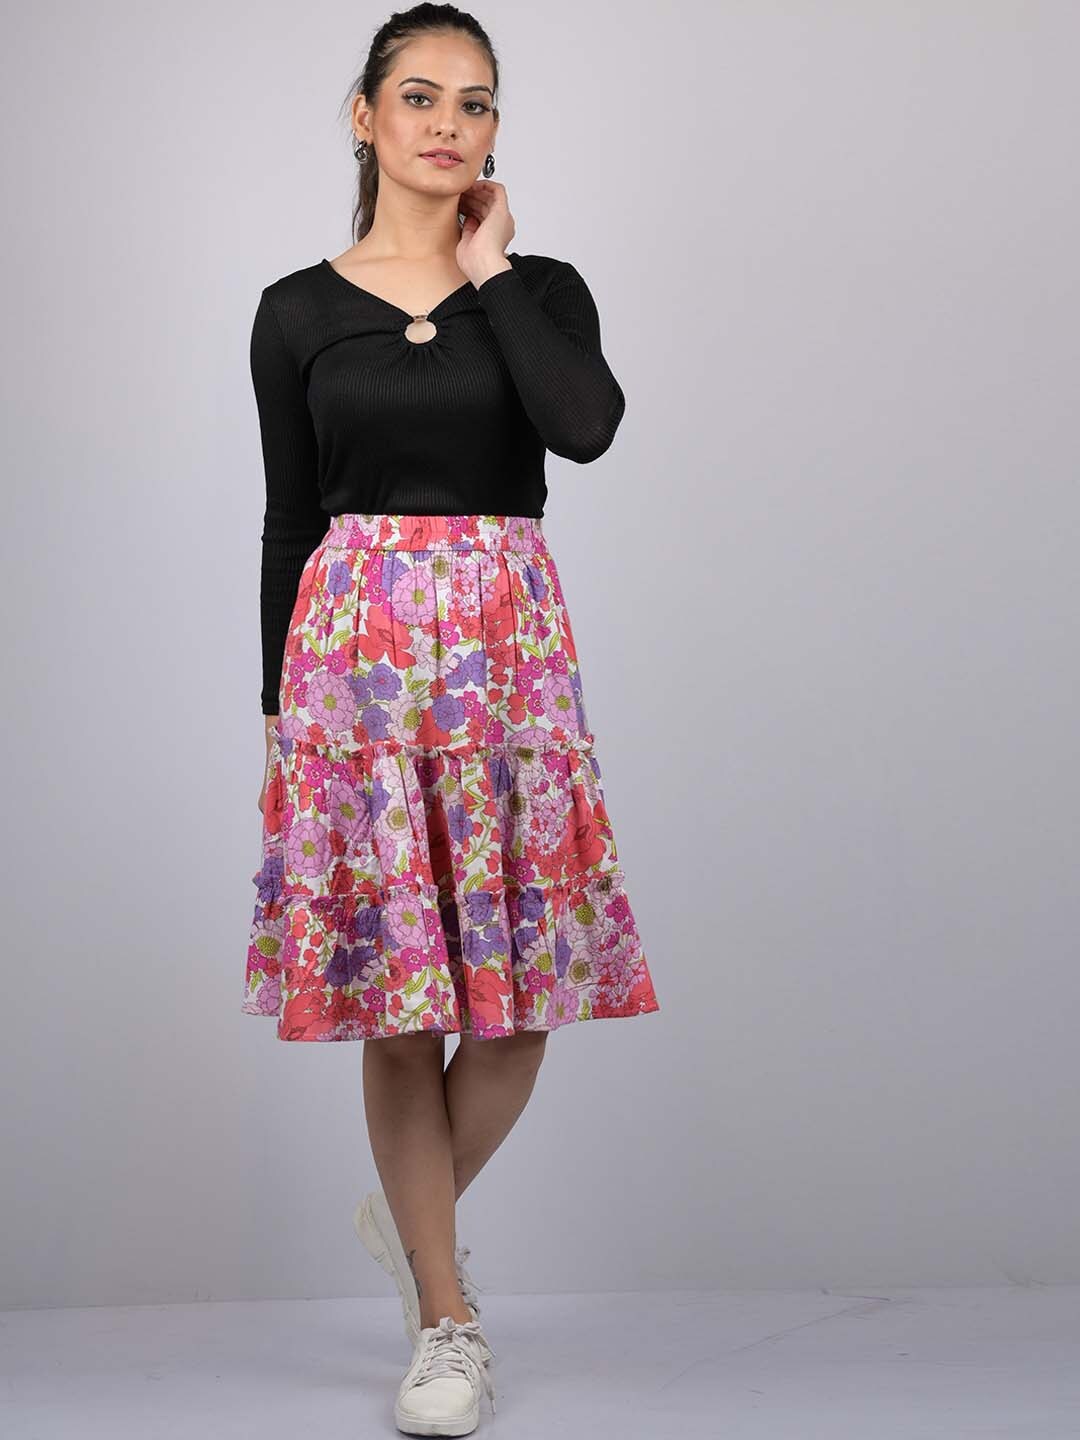 OWO THE LABEL Printed Flared Midi Skirt Price in India